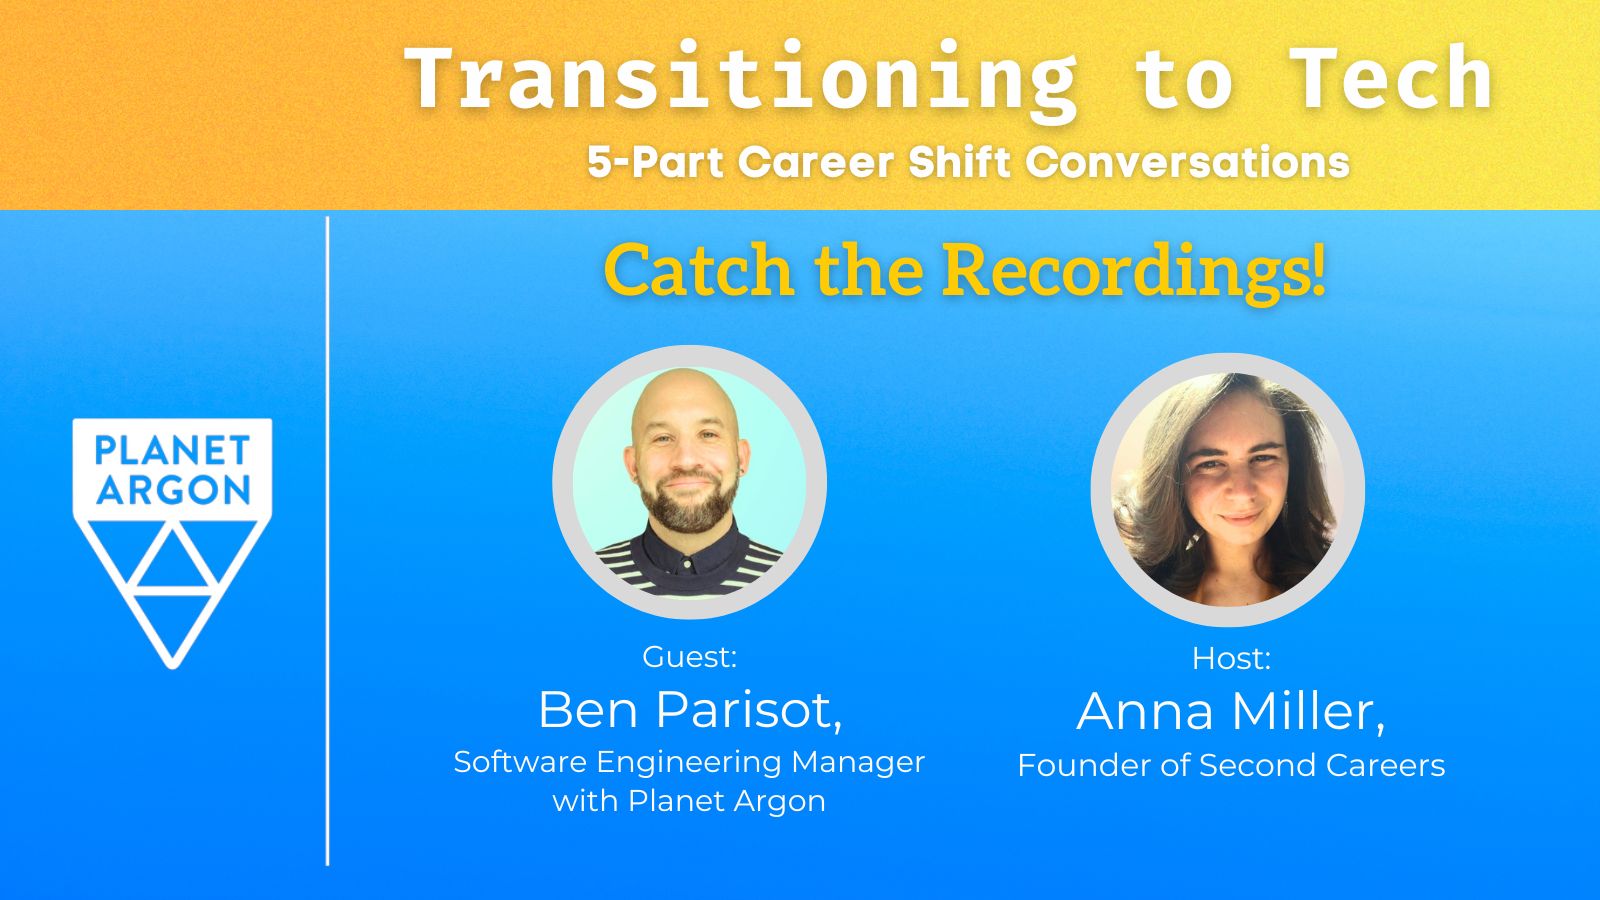 Transitioning to Tech: Career-Shift Conversations with Ben Parisot